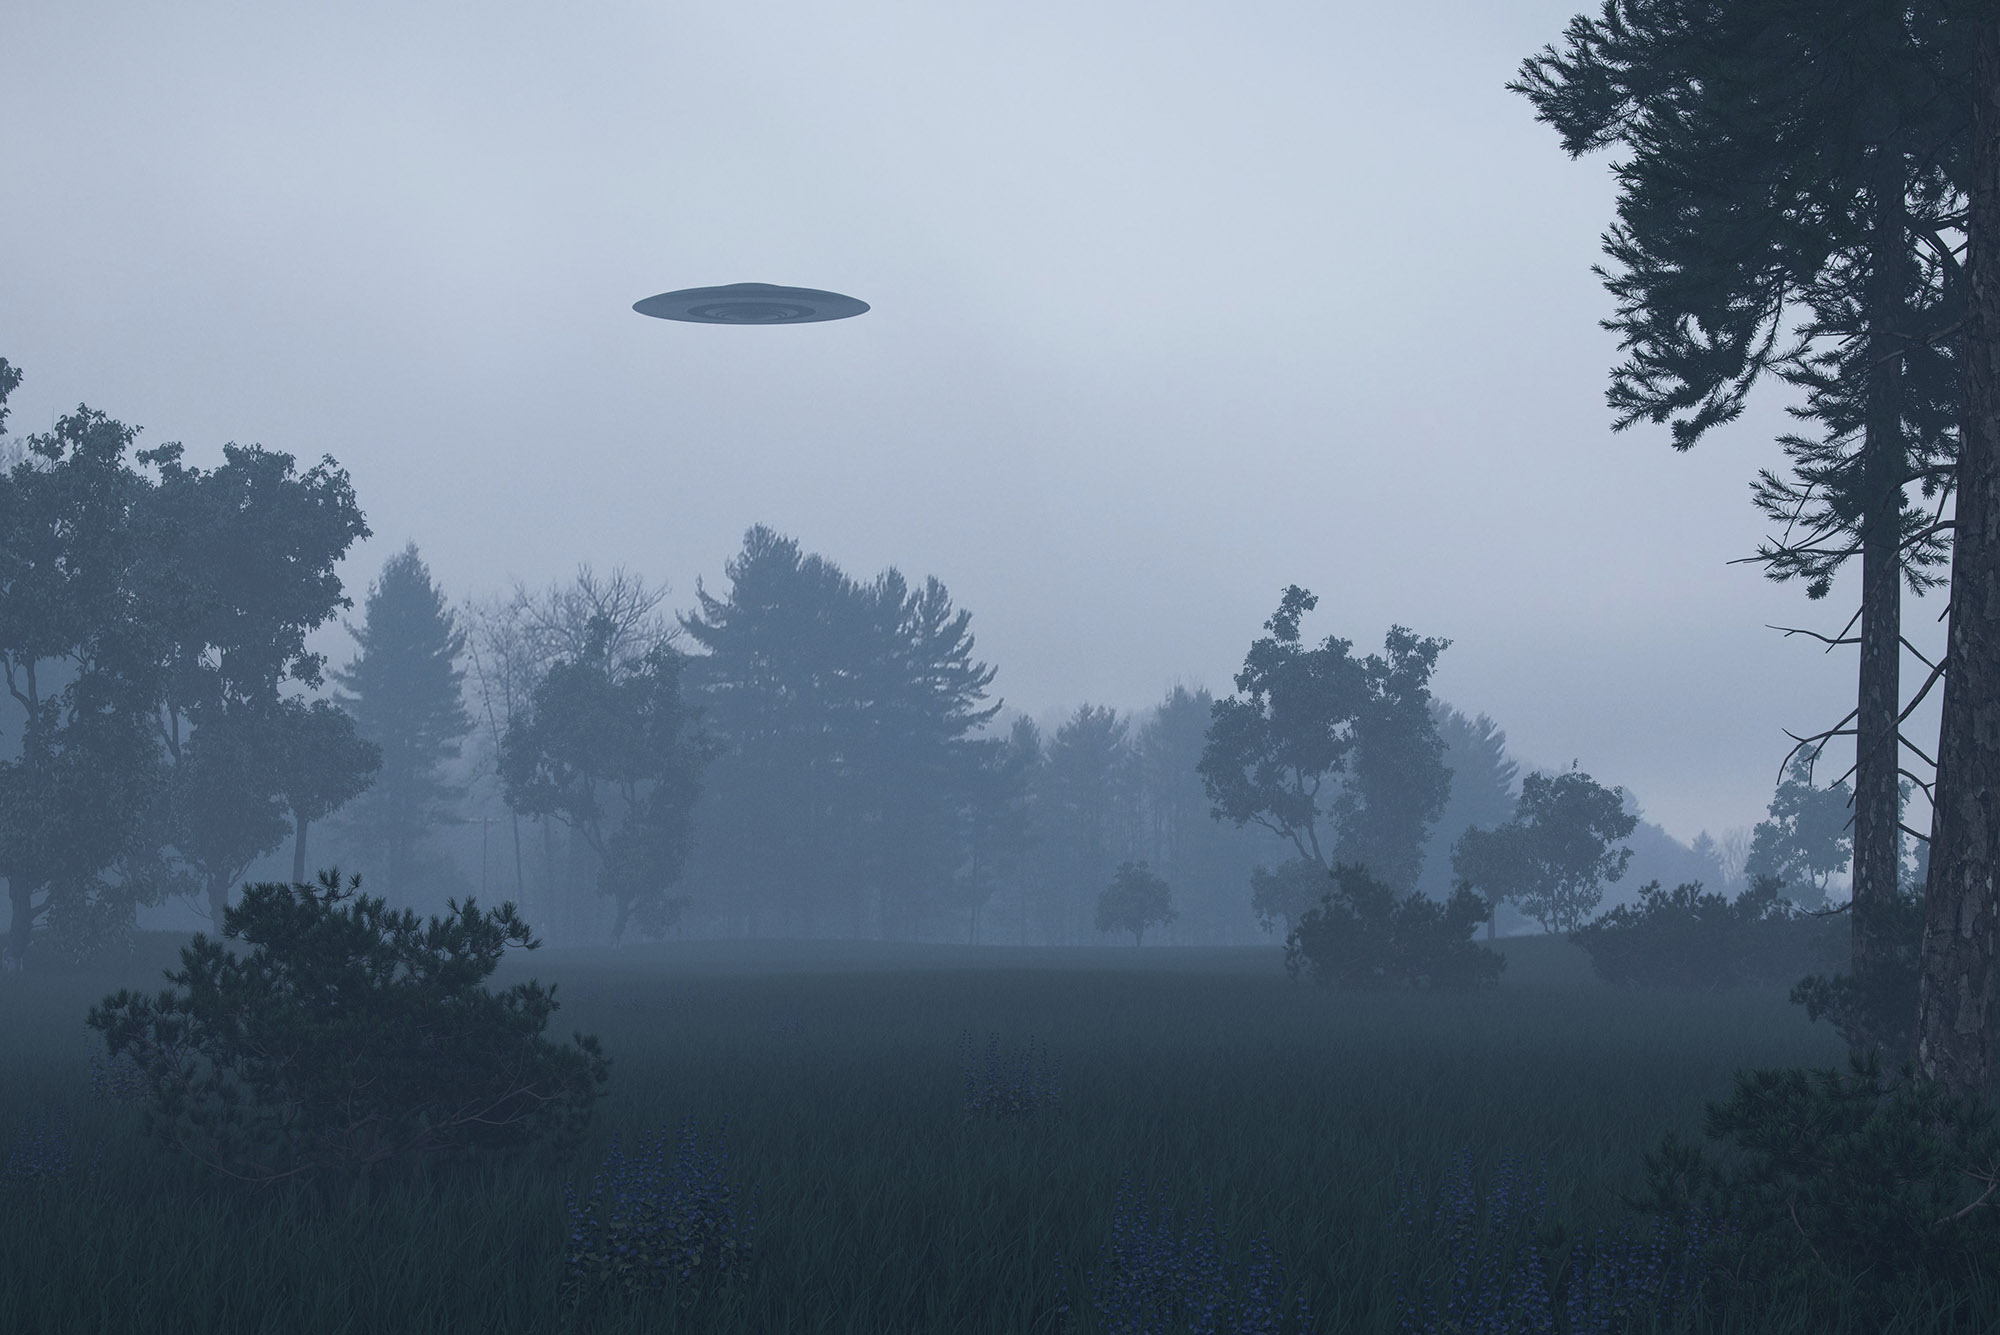 UFO Sightings Are Likely Secret Military Tests, US Says